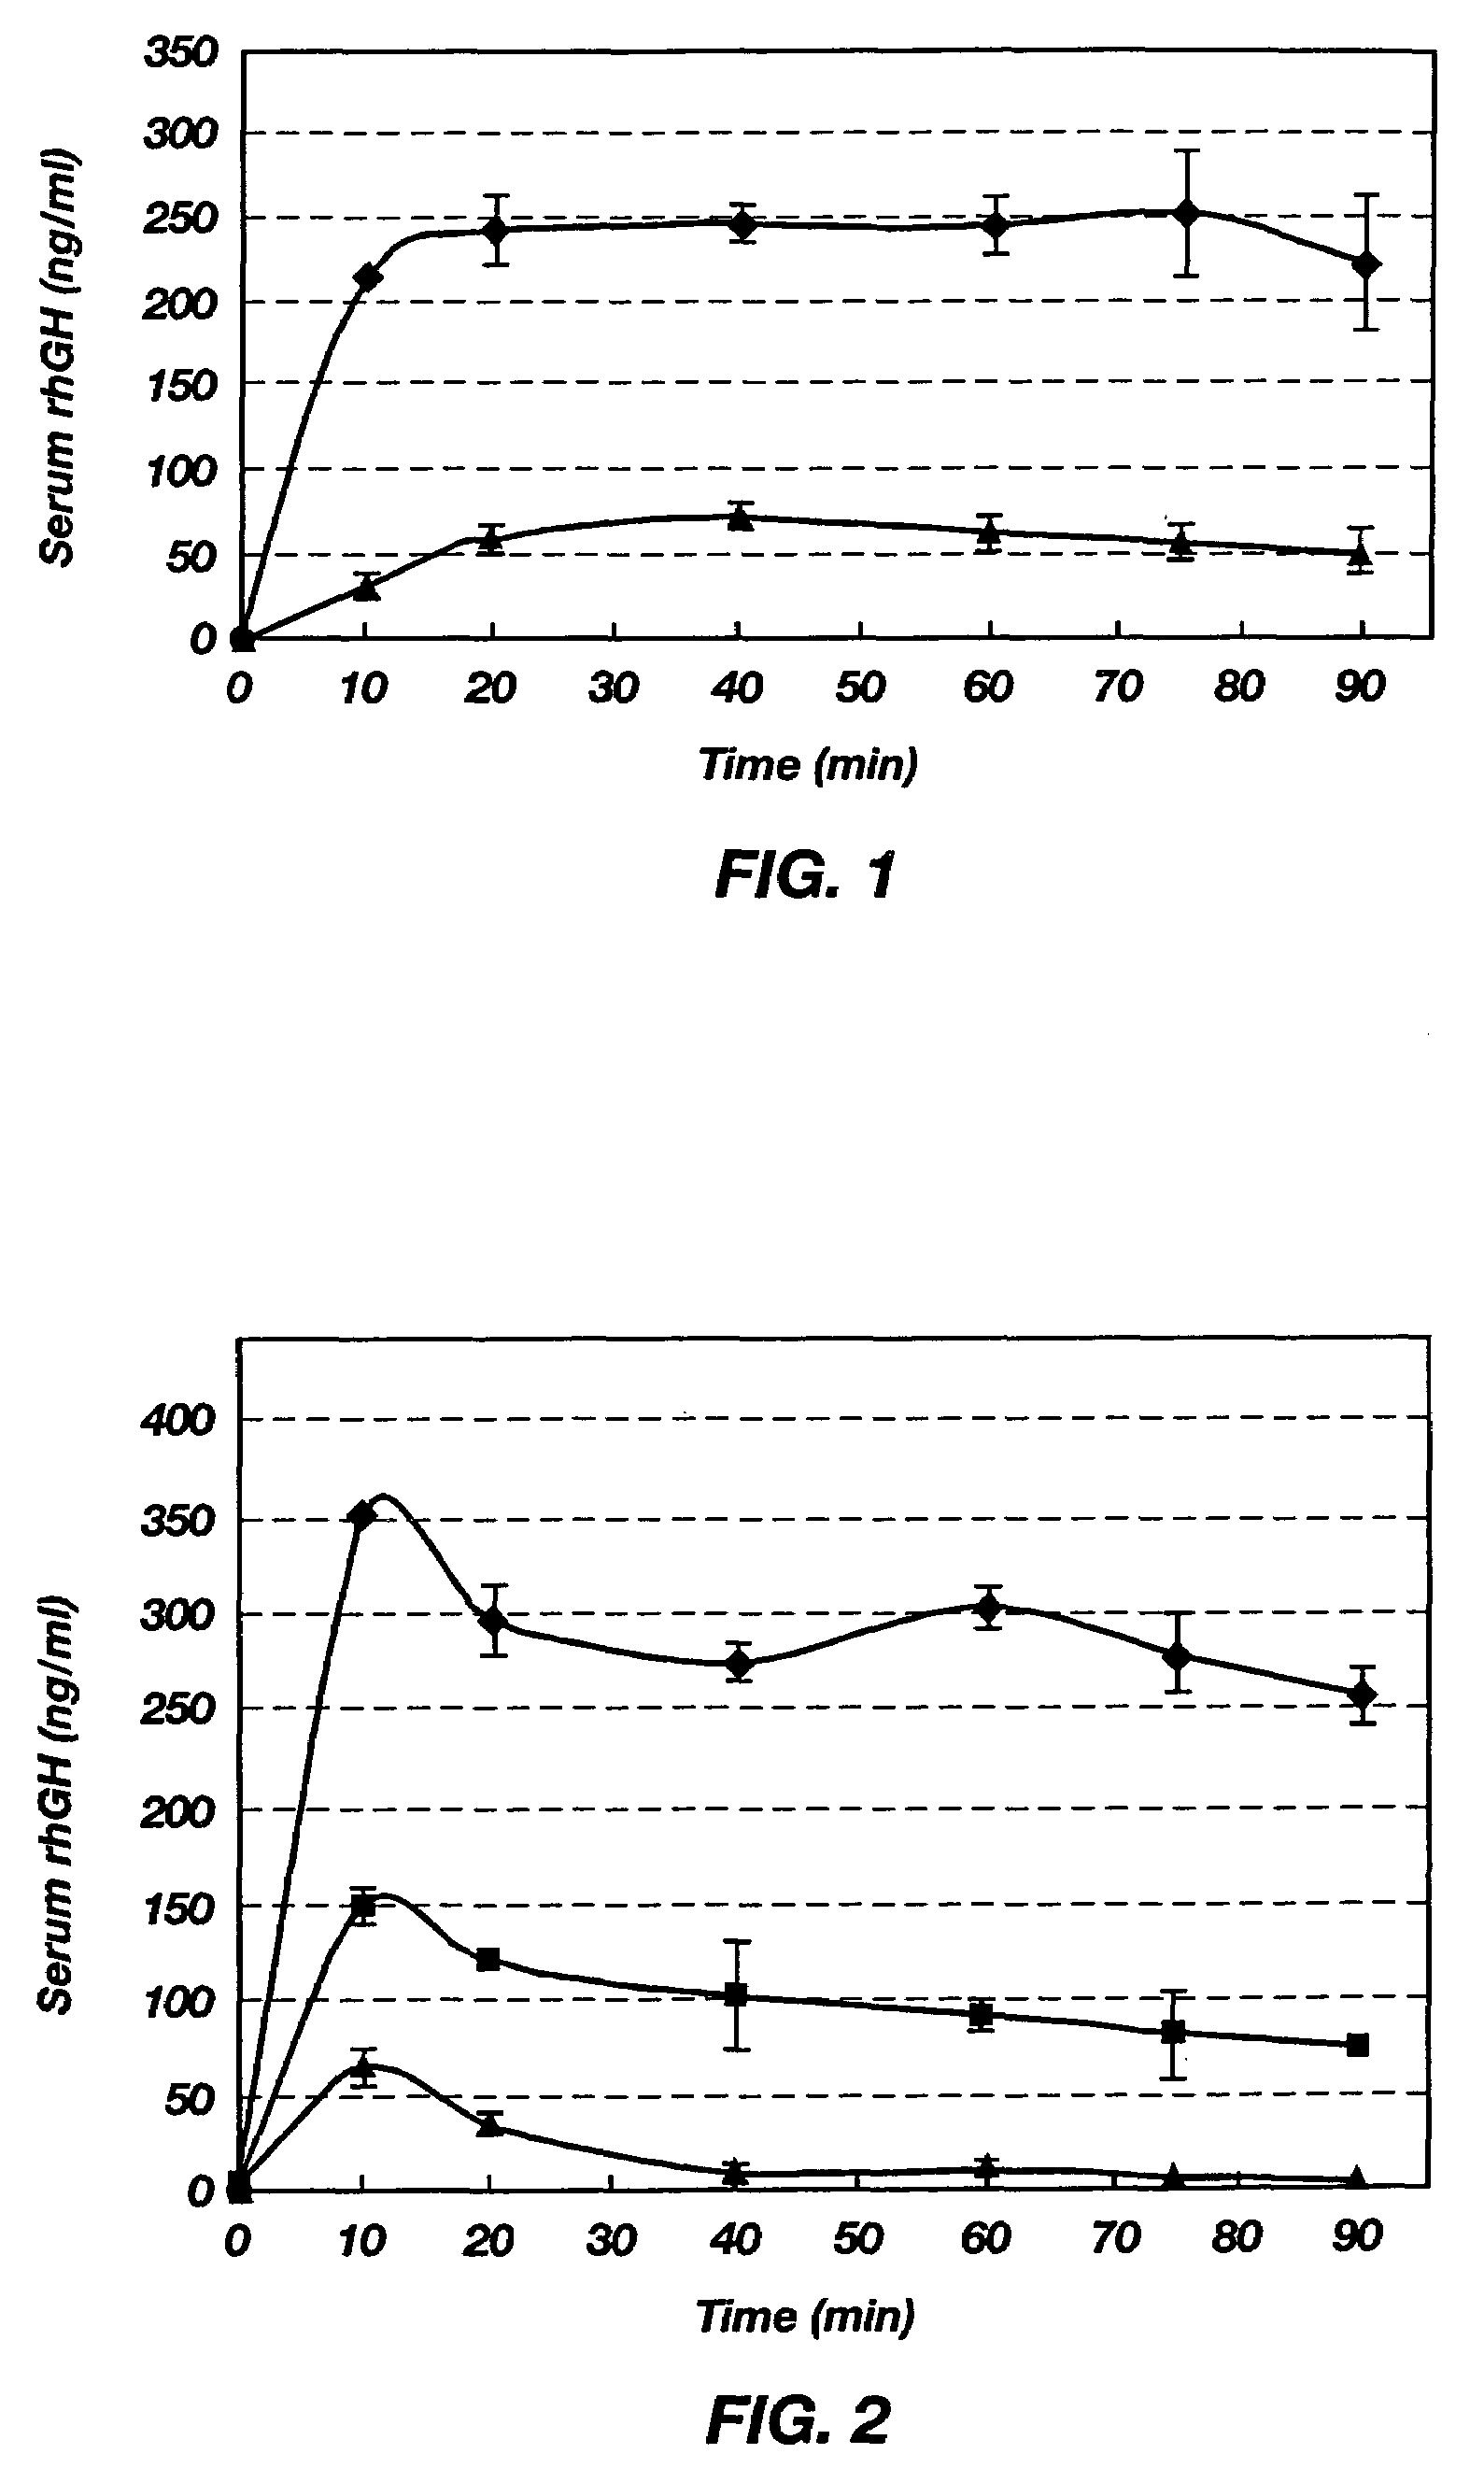 Oral formulation for delivery of poorly absorbed drugs